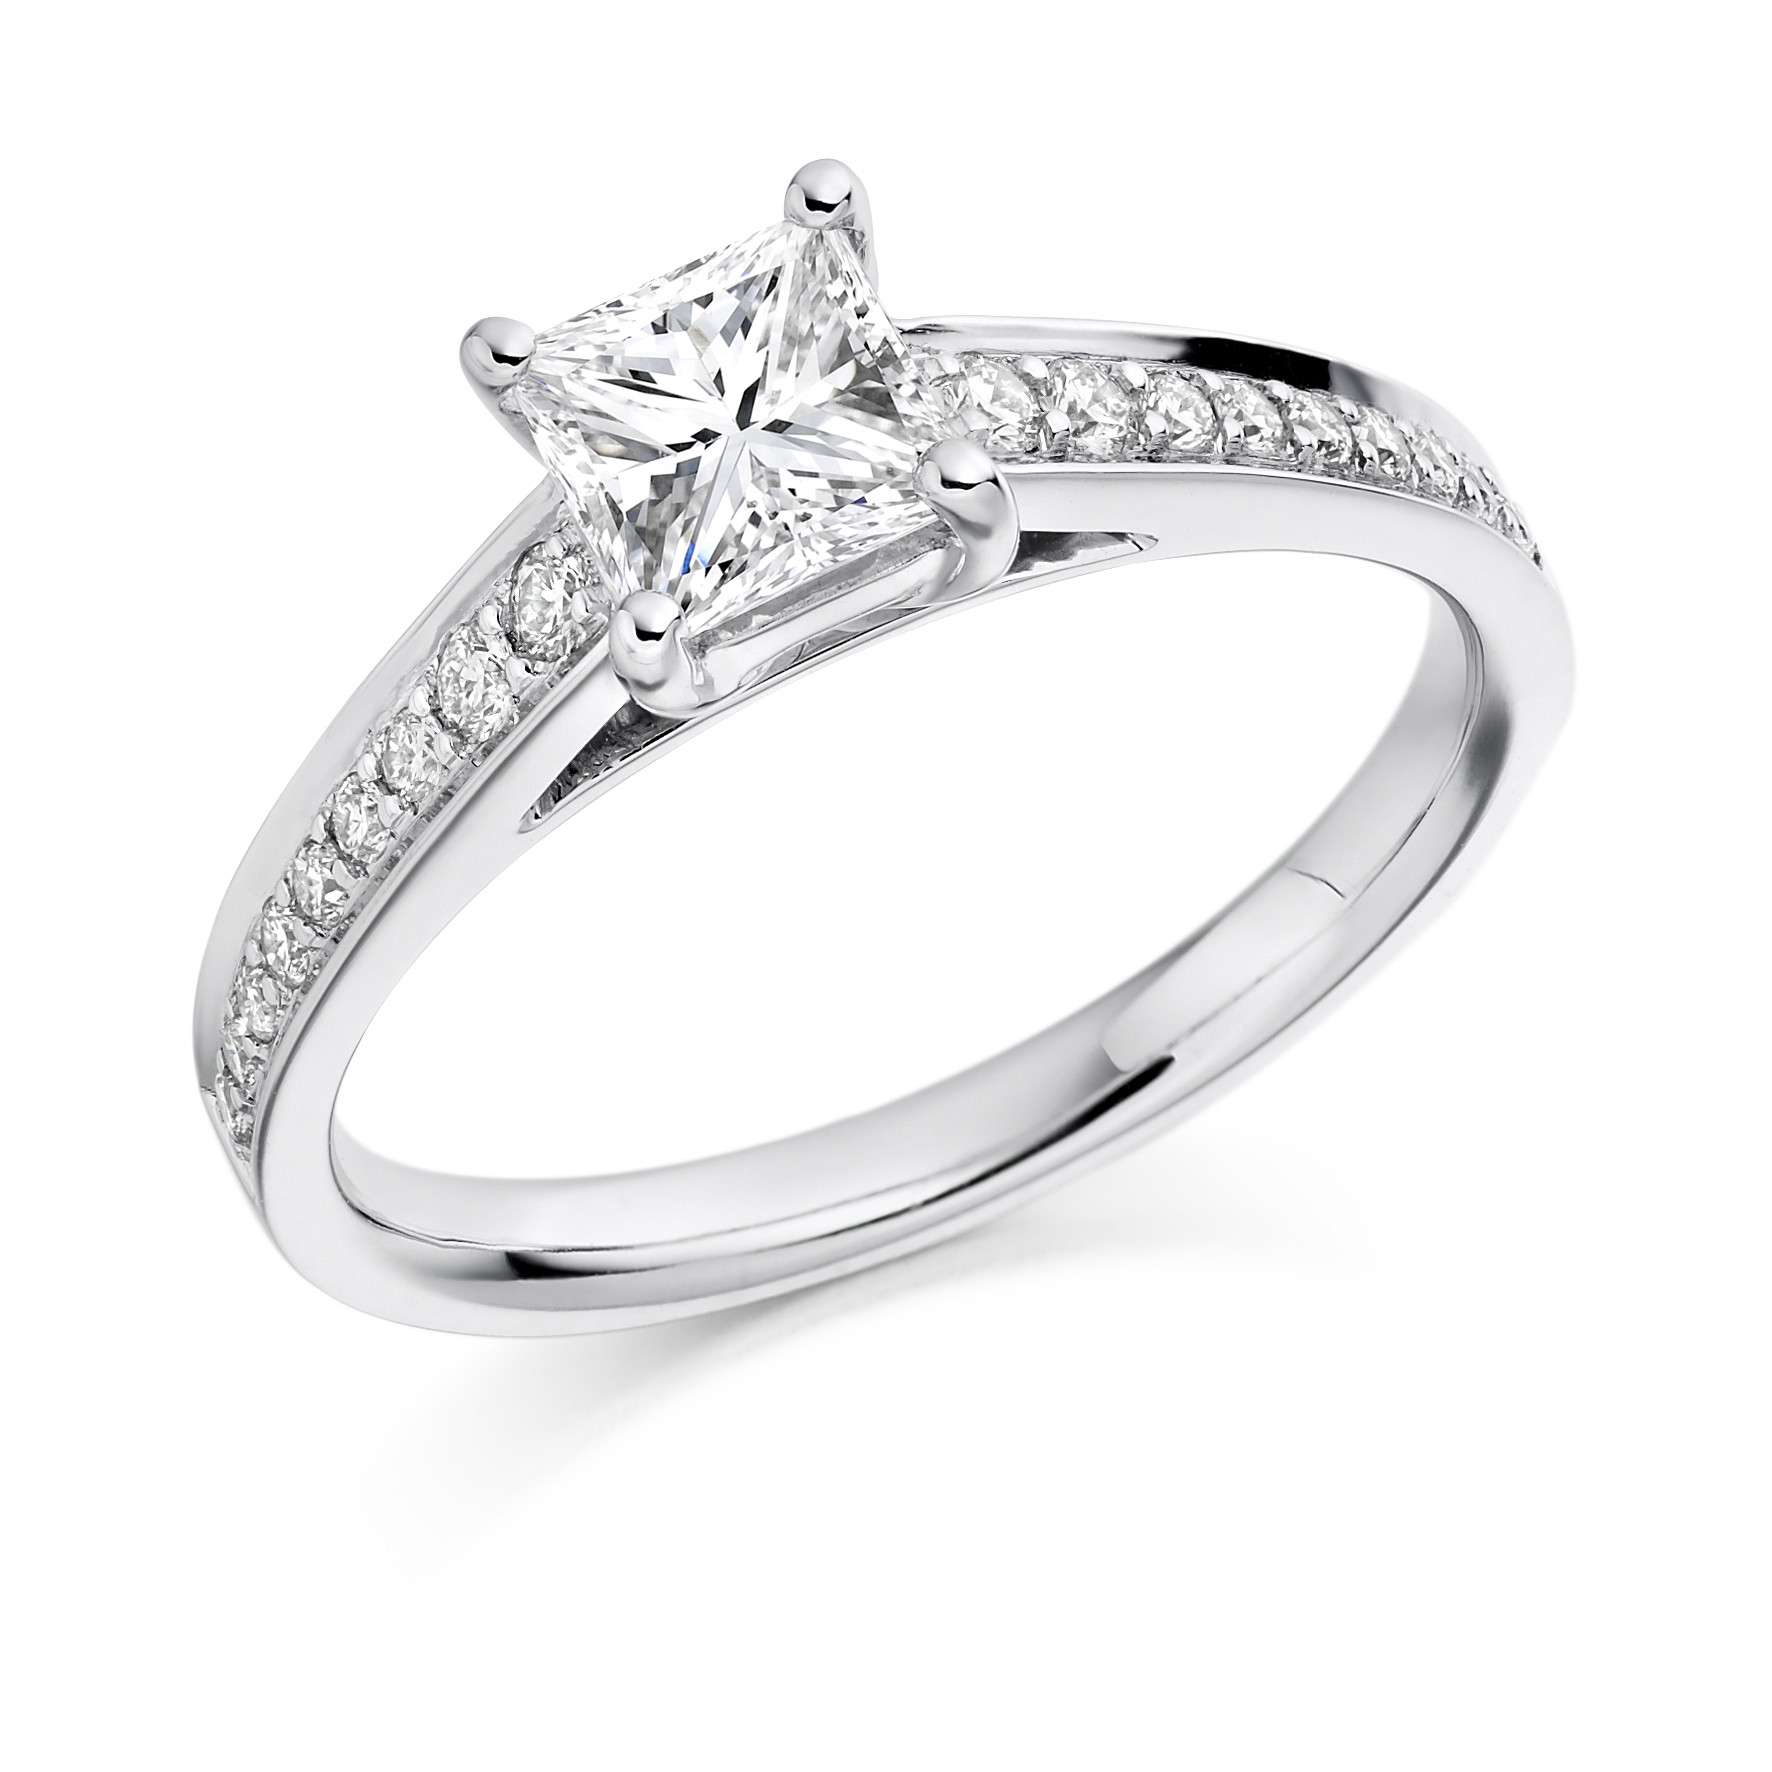 Best Place To Buy Wedding Rings
 Best Place To Buy Wedding Rings London